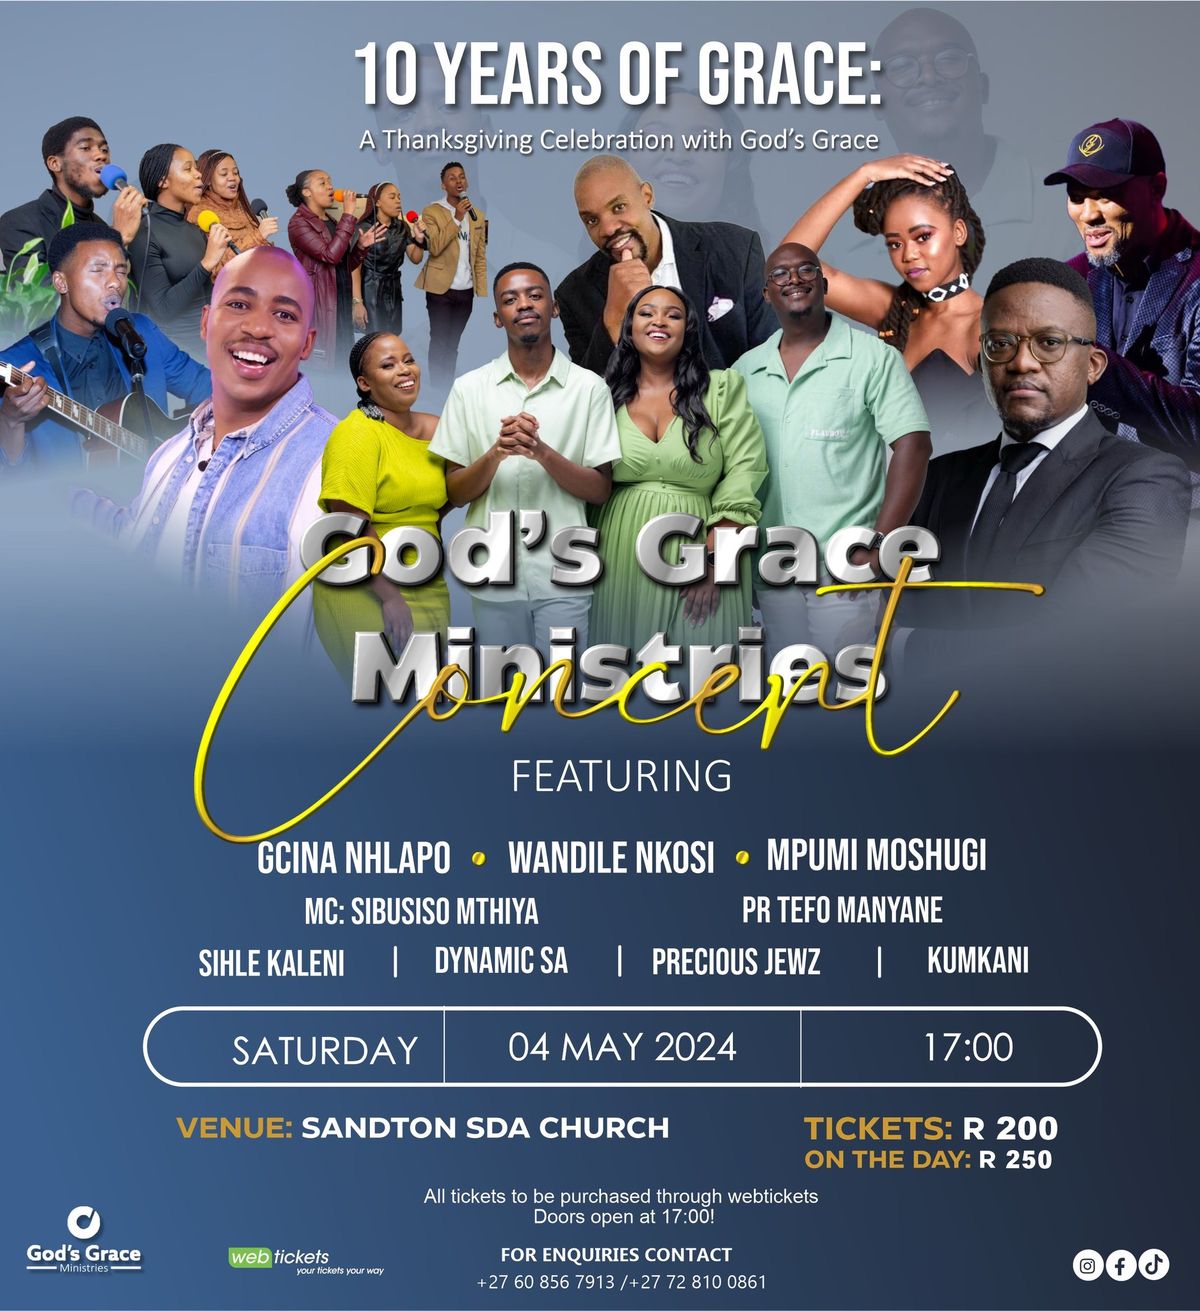 10 Years of Grace: A Thanksgiving Celebration with God's Grace